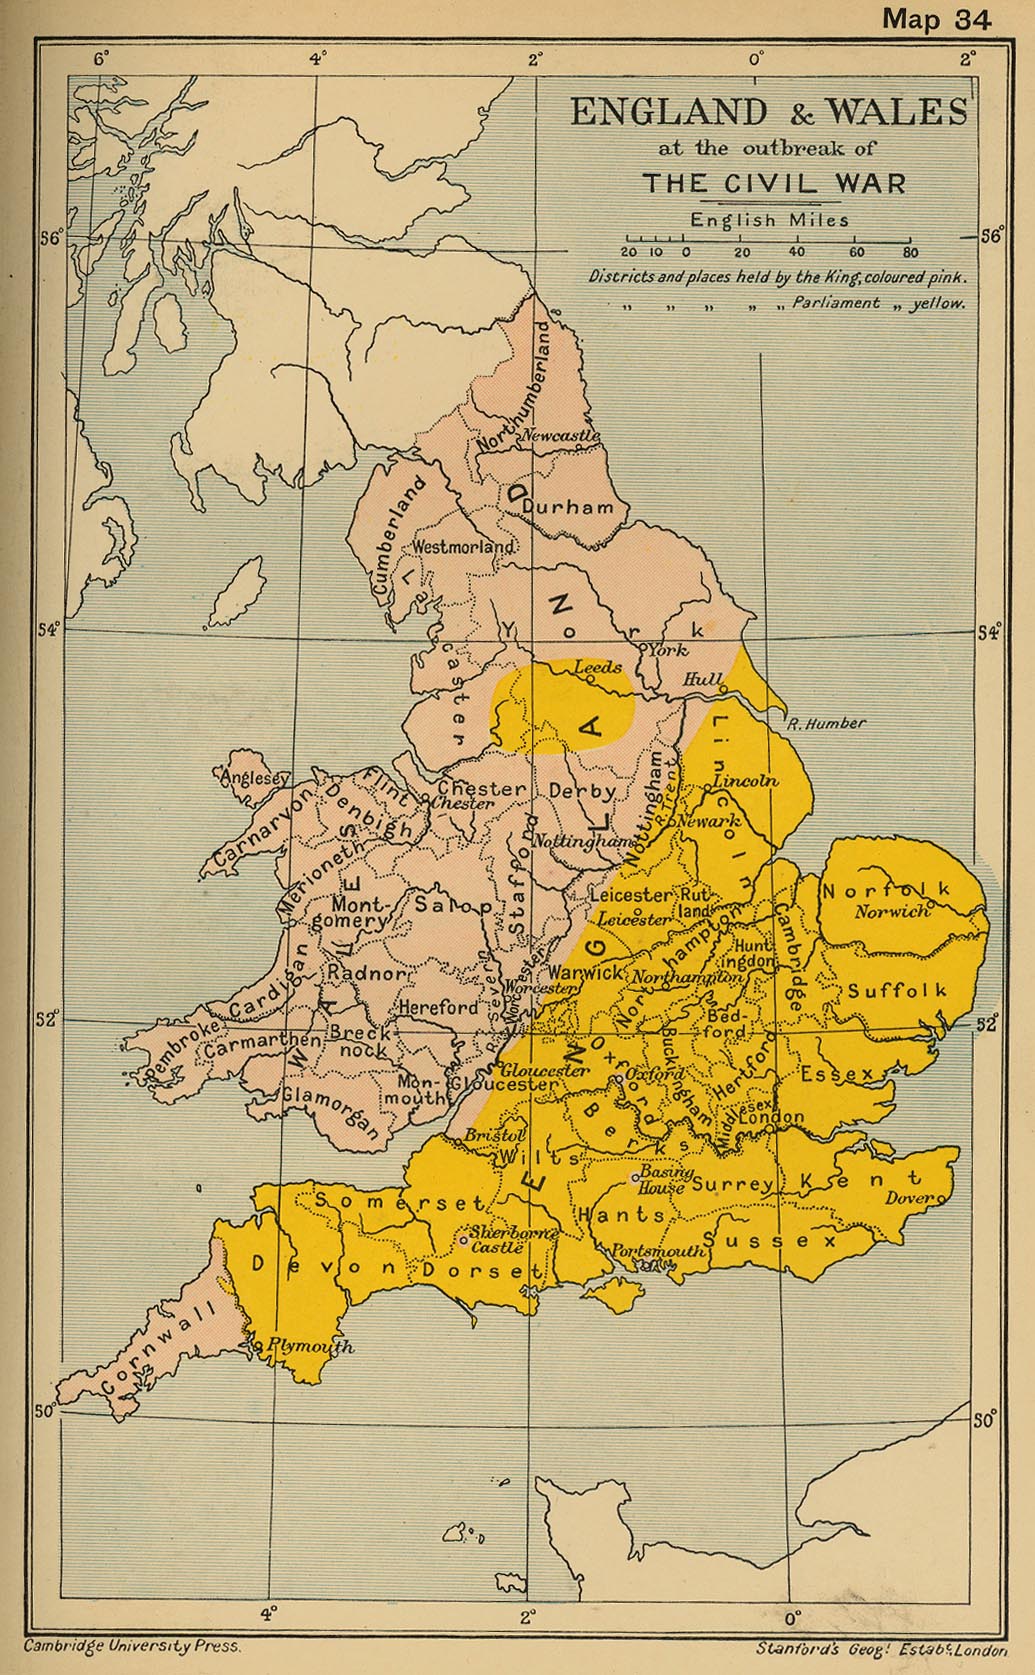 Map of England and Wales at the beginning of the Civil War 1642